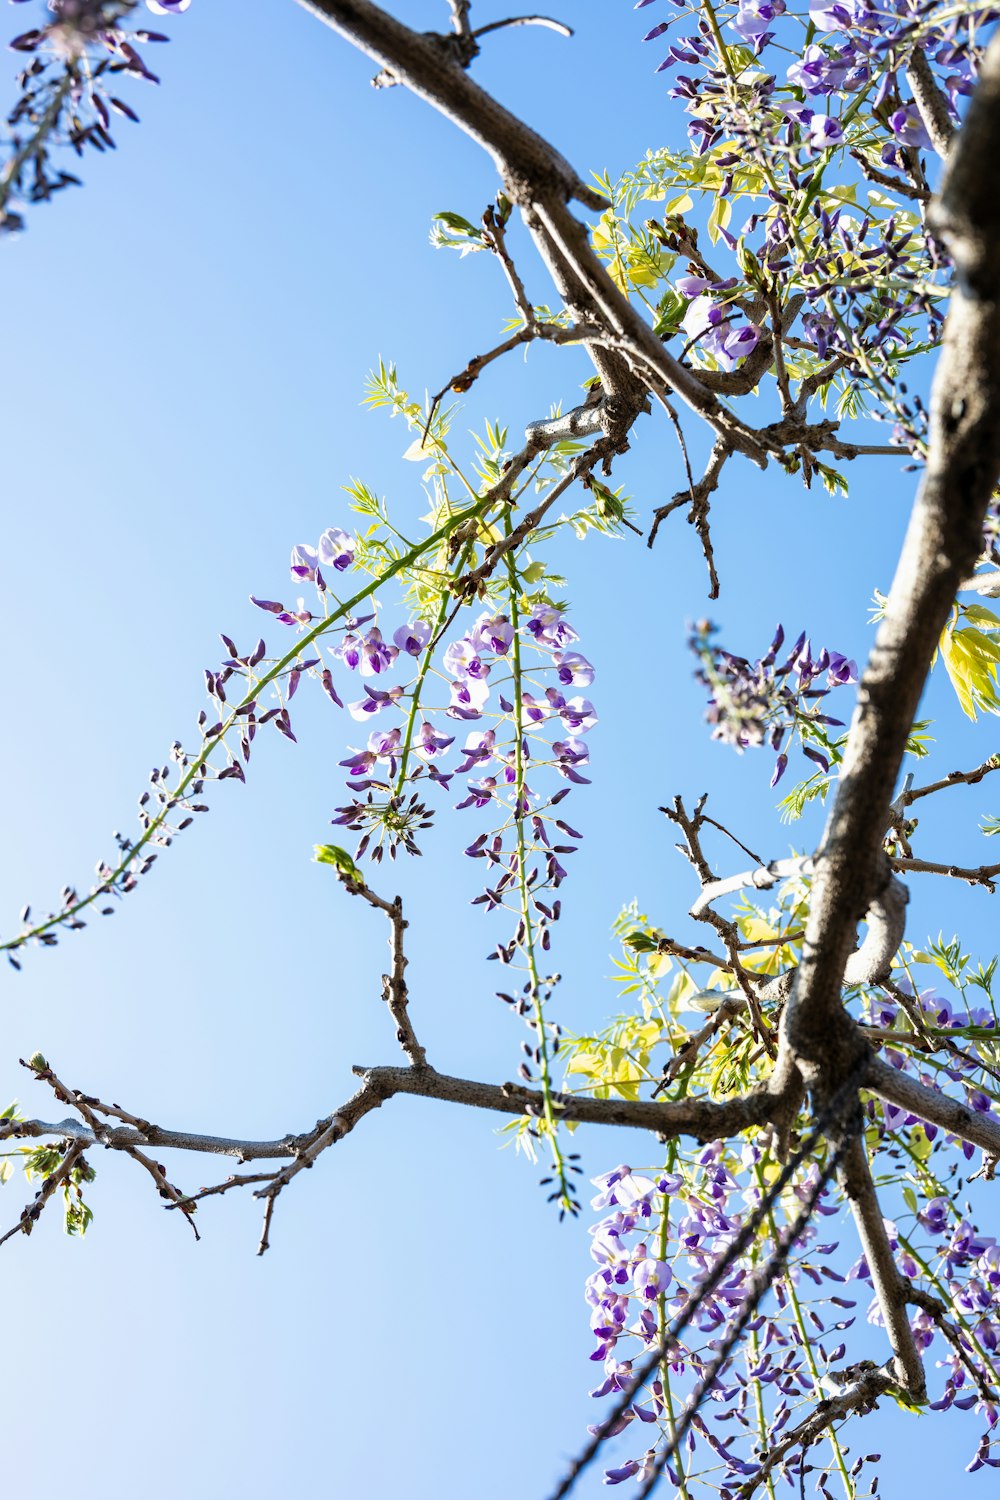 a tree branch with purple flowers and green leaves